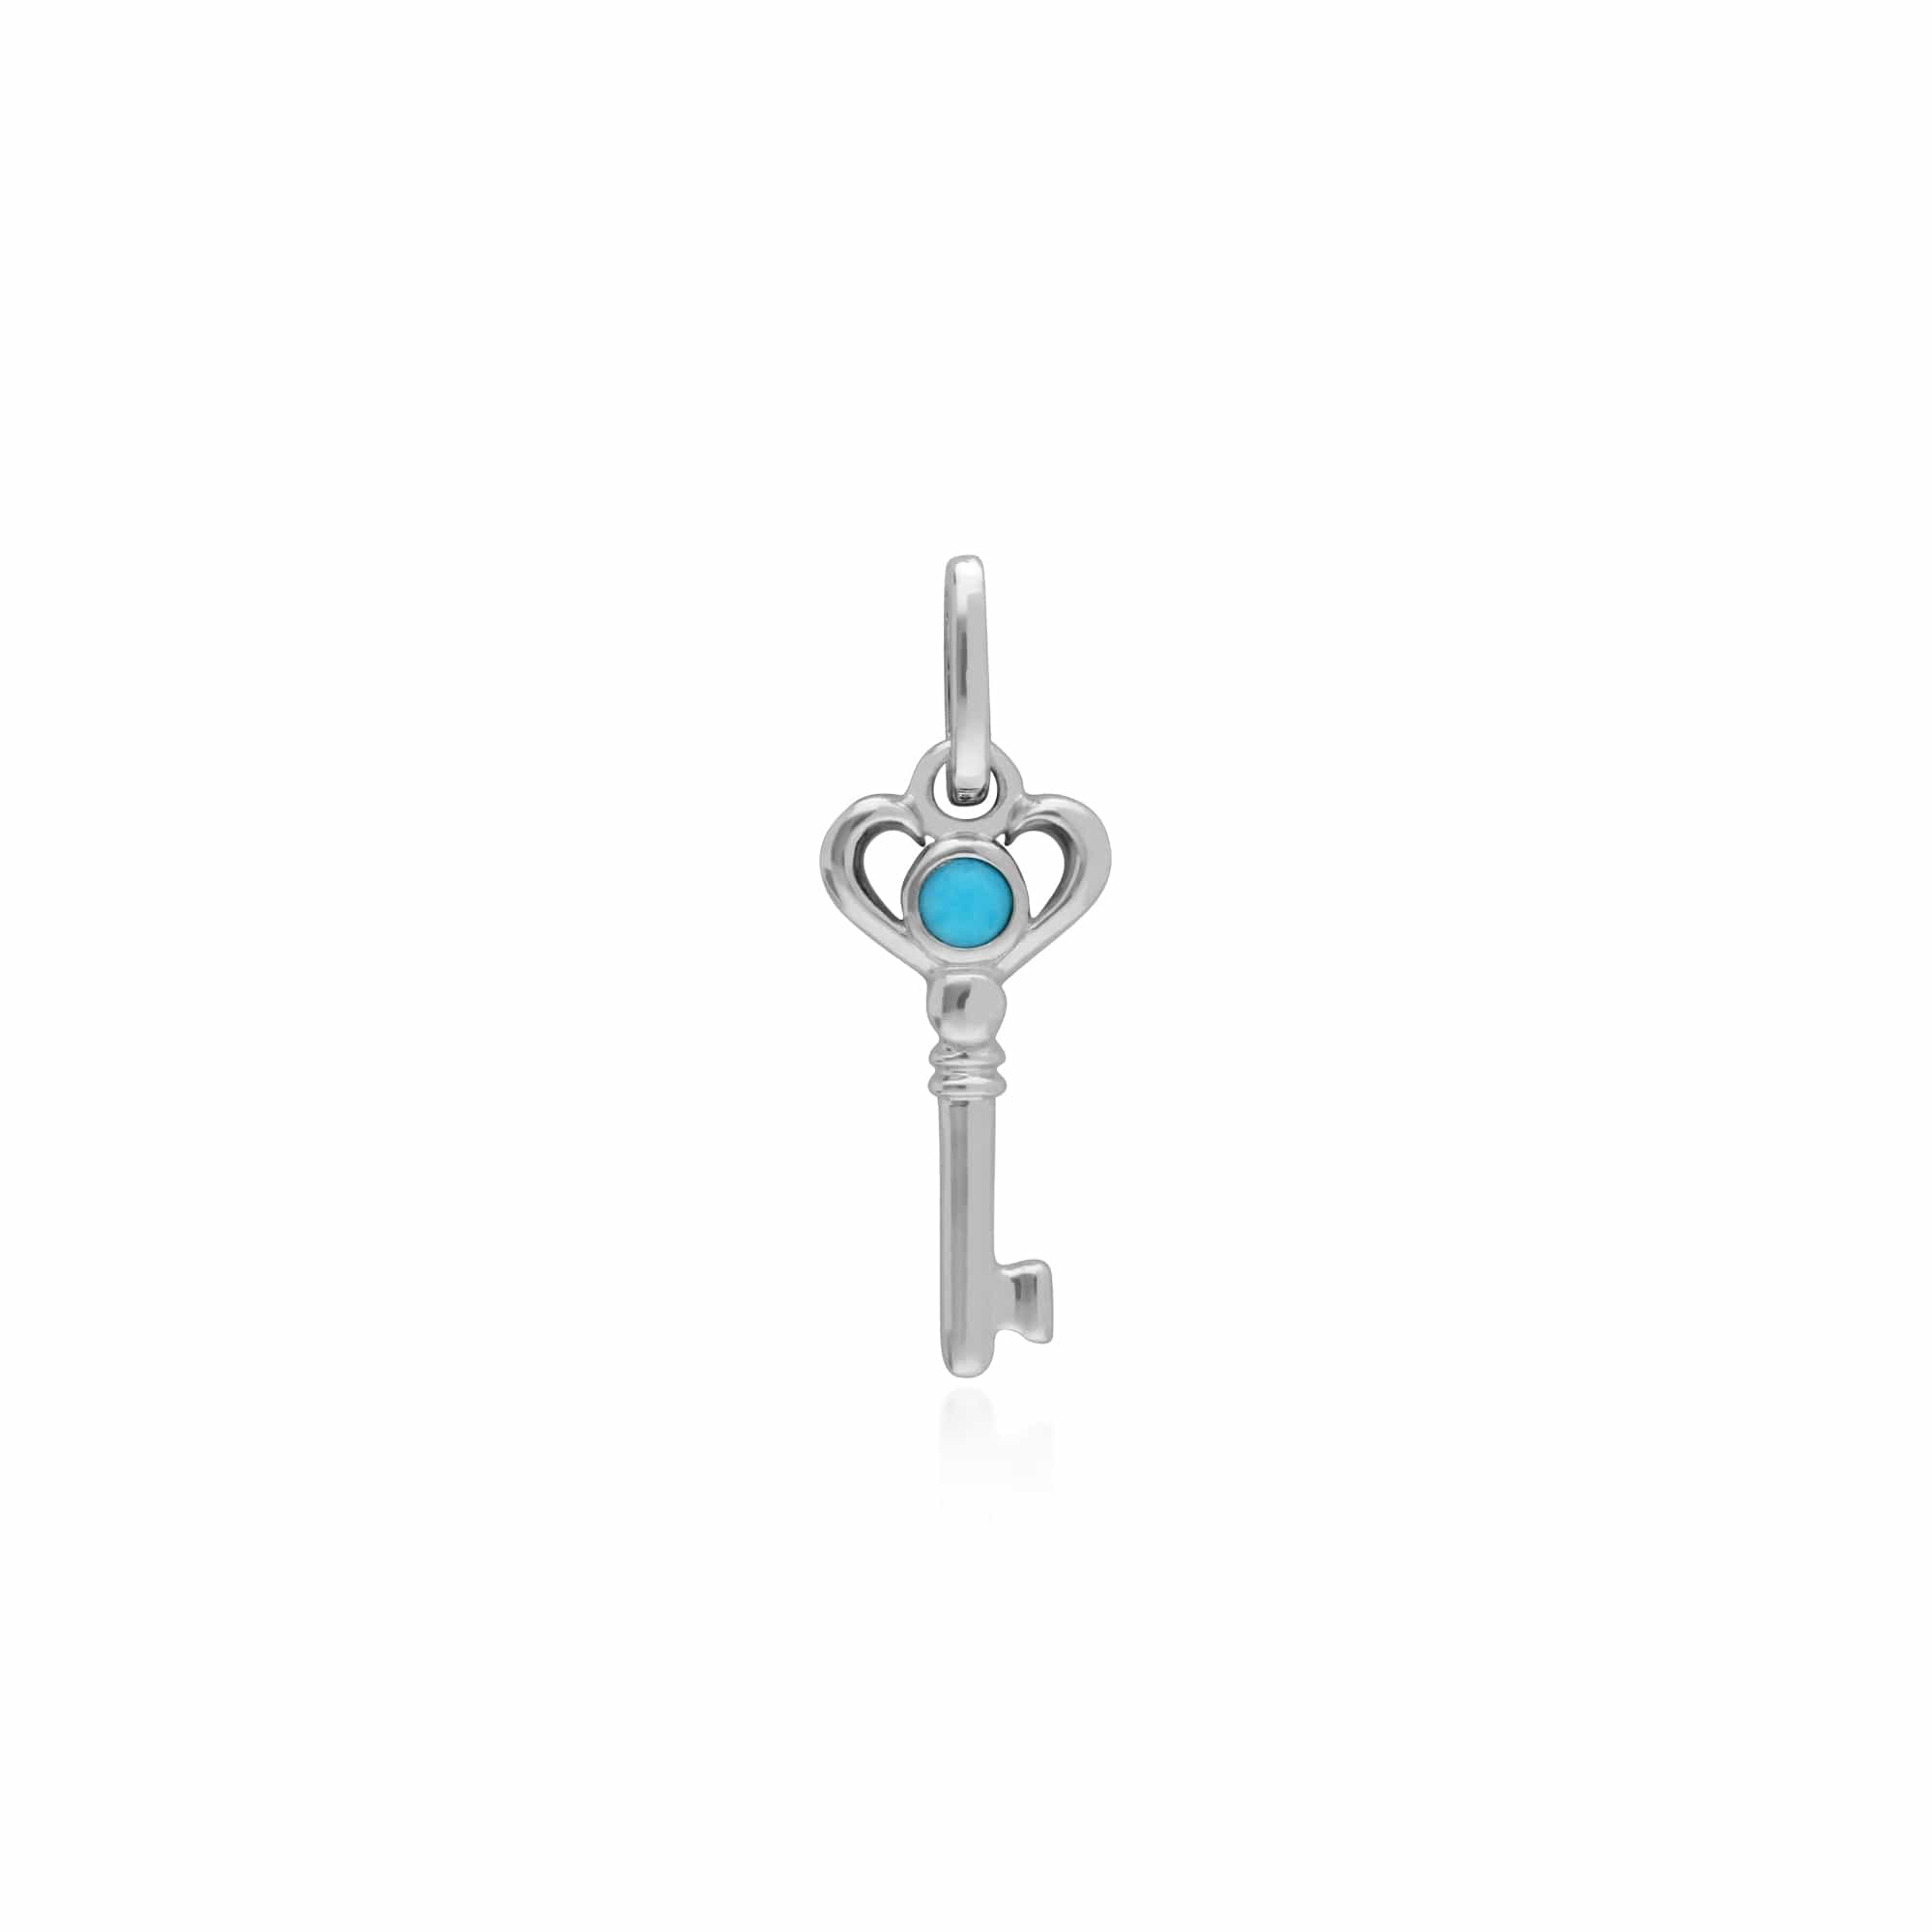 270P028301925-270P026601925 Classic Swirl Heart Lock Pendant & Turquoise Key Charm in 925 Sterling Silver 2